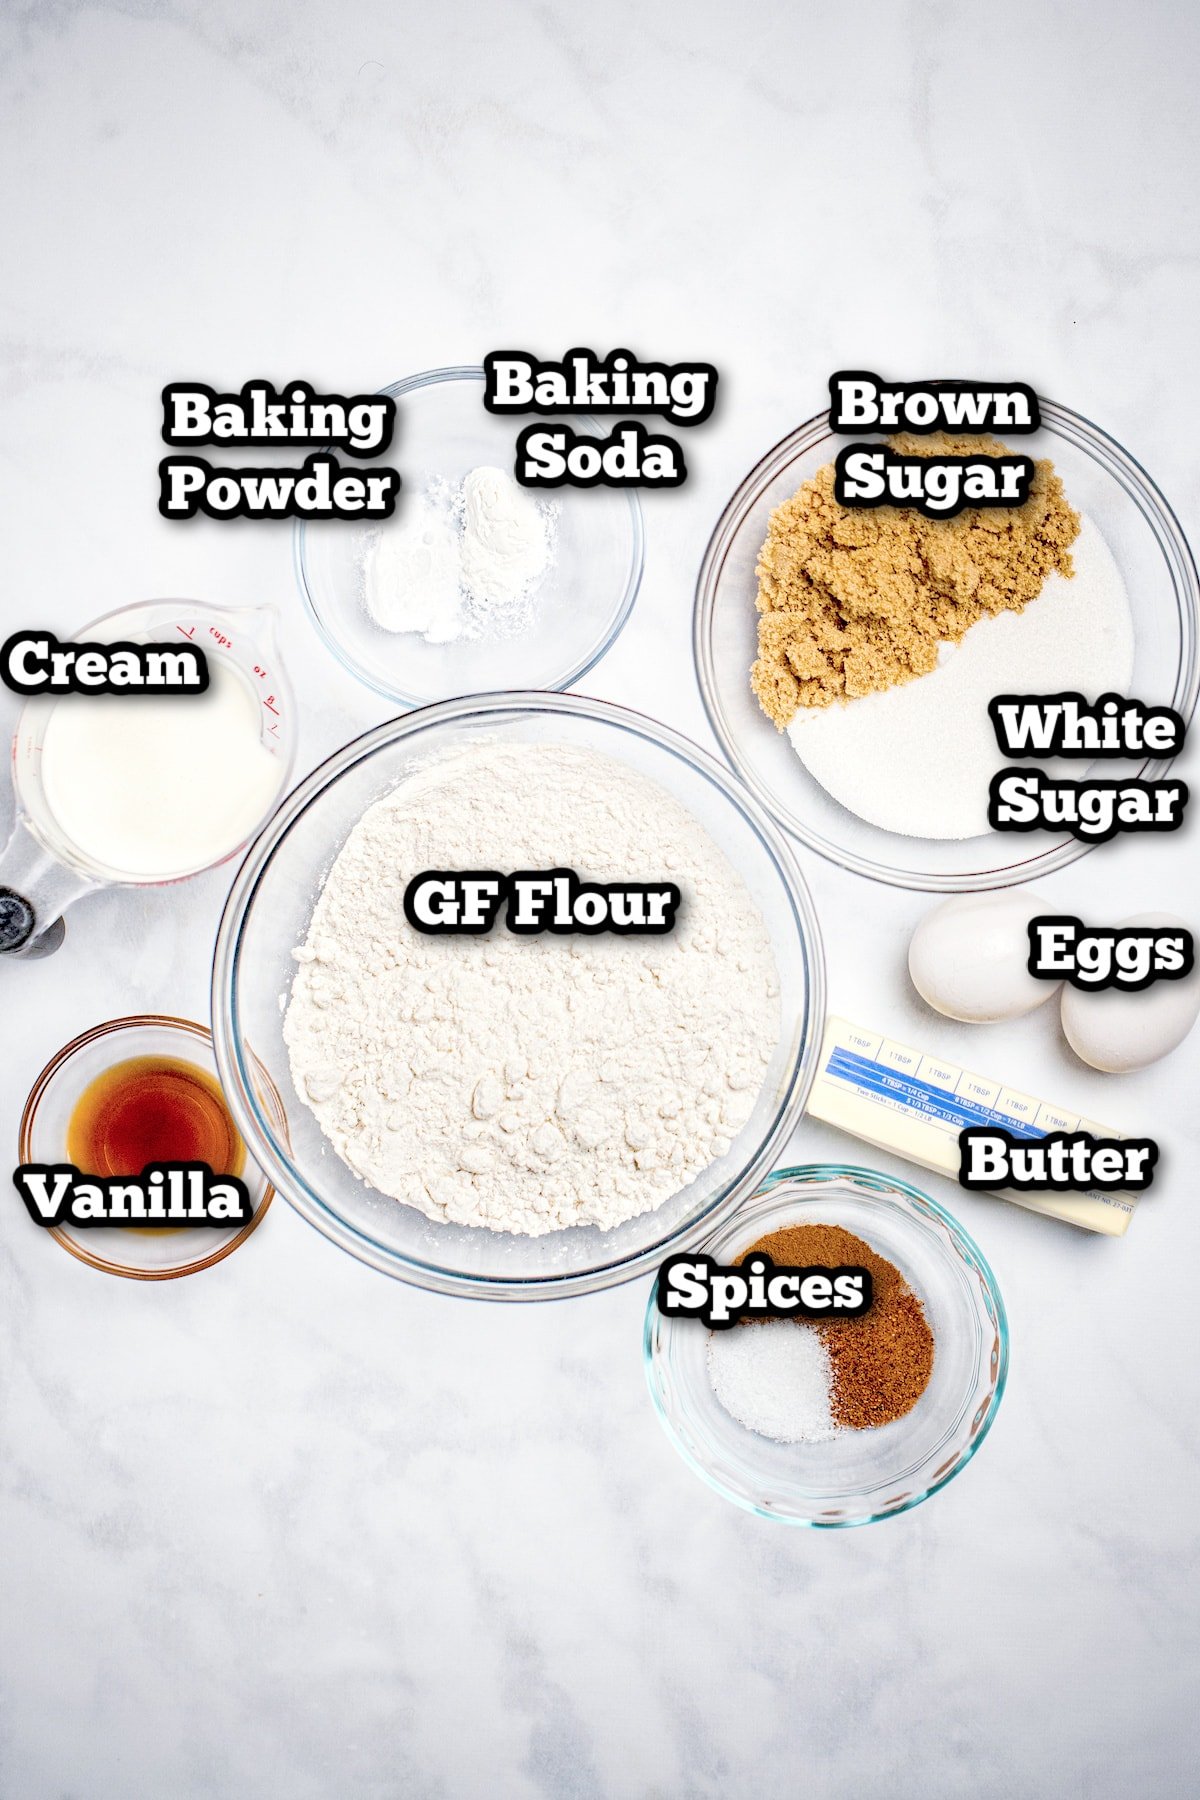 Ingredients for cinnamon sugar doughnuts on a table.